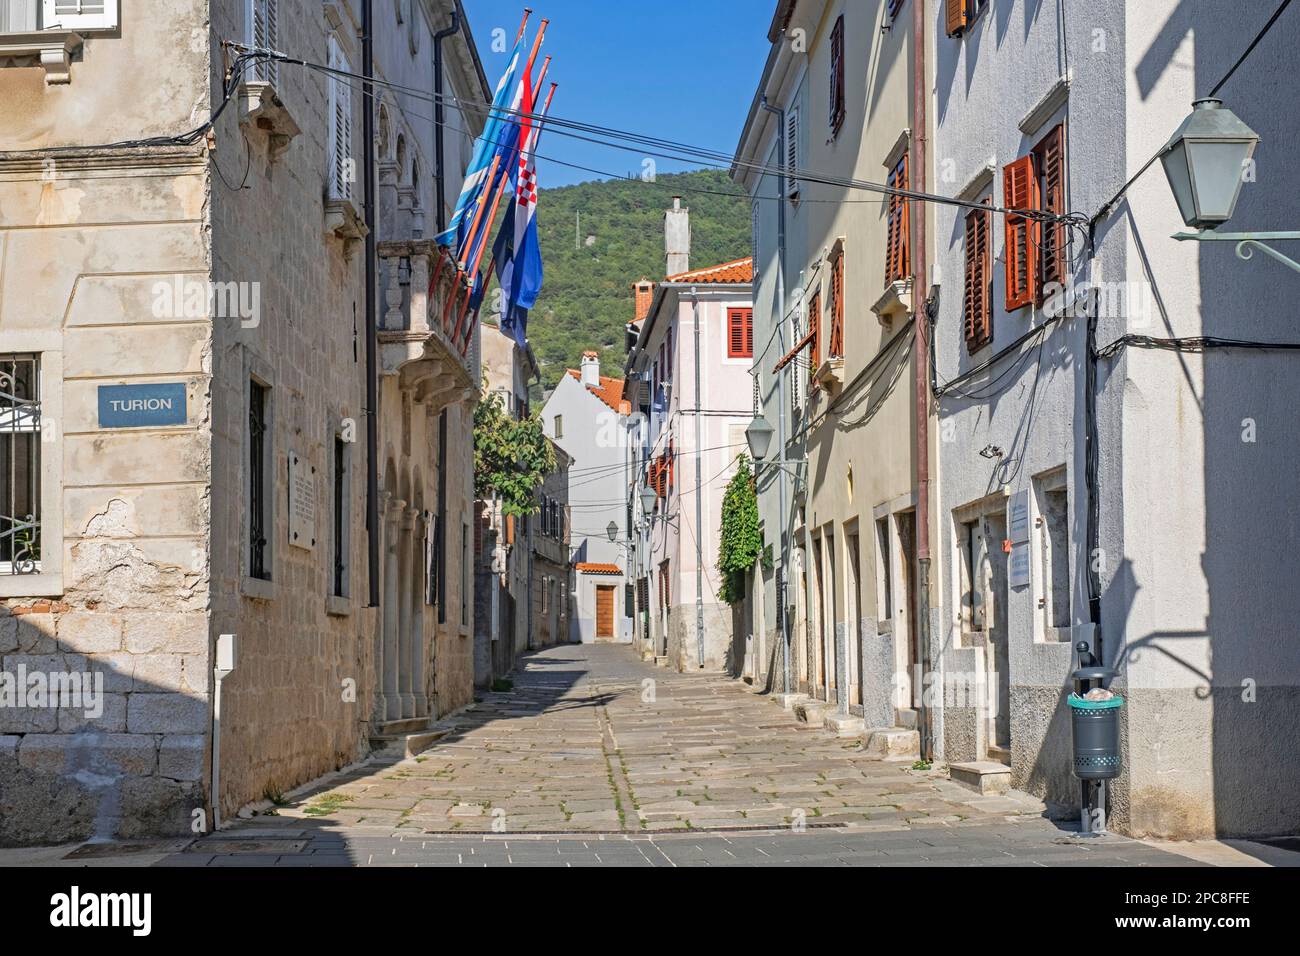 Alley with old houses in the historic centre of the town Cres on the island Cherso, Kvarner Bay, Primorje-Gorski Kotar County, Croatia Stock Photo